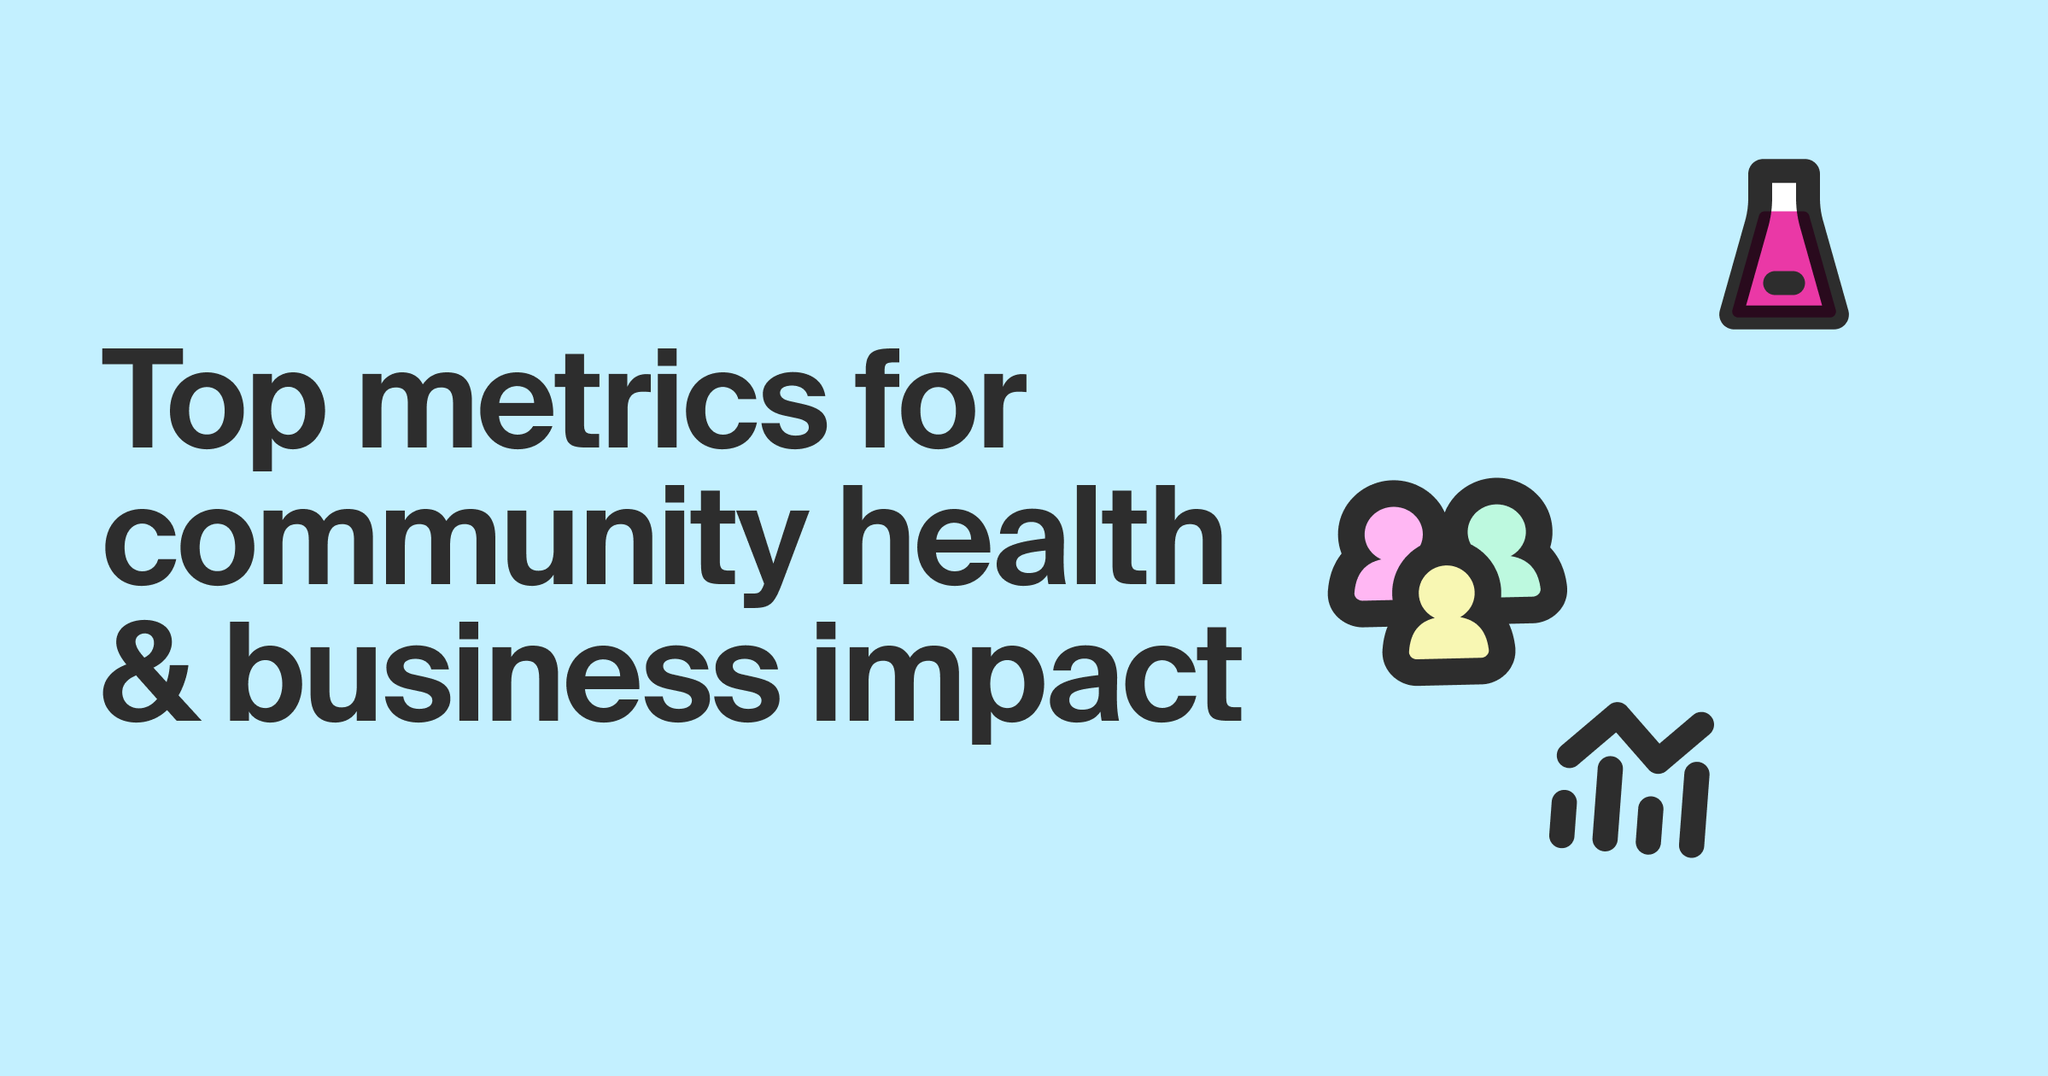 Top metrics for community health and business impact